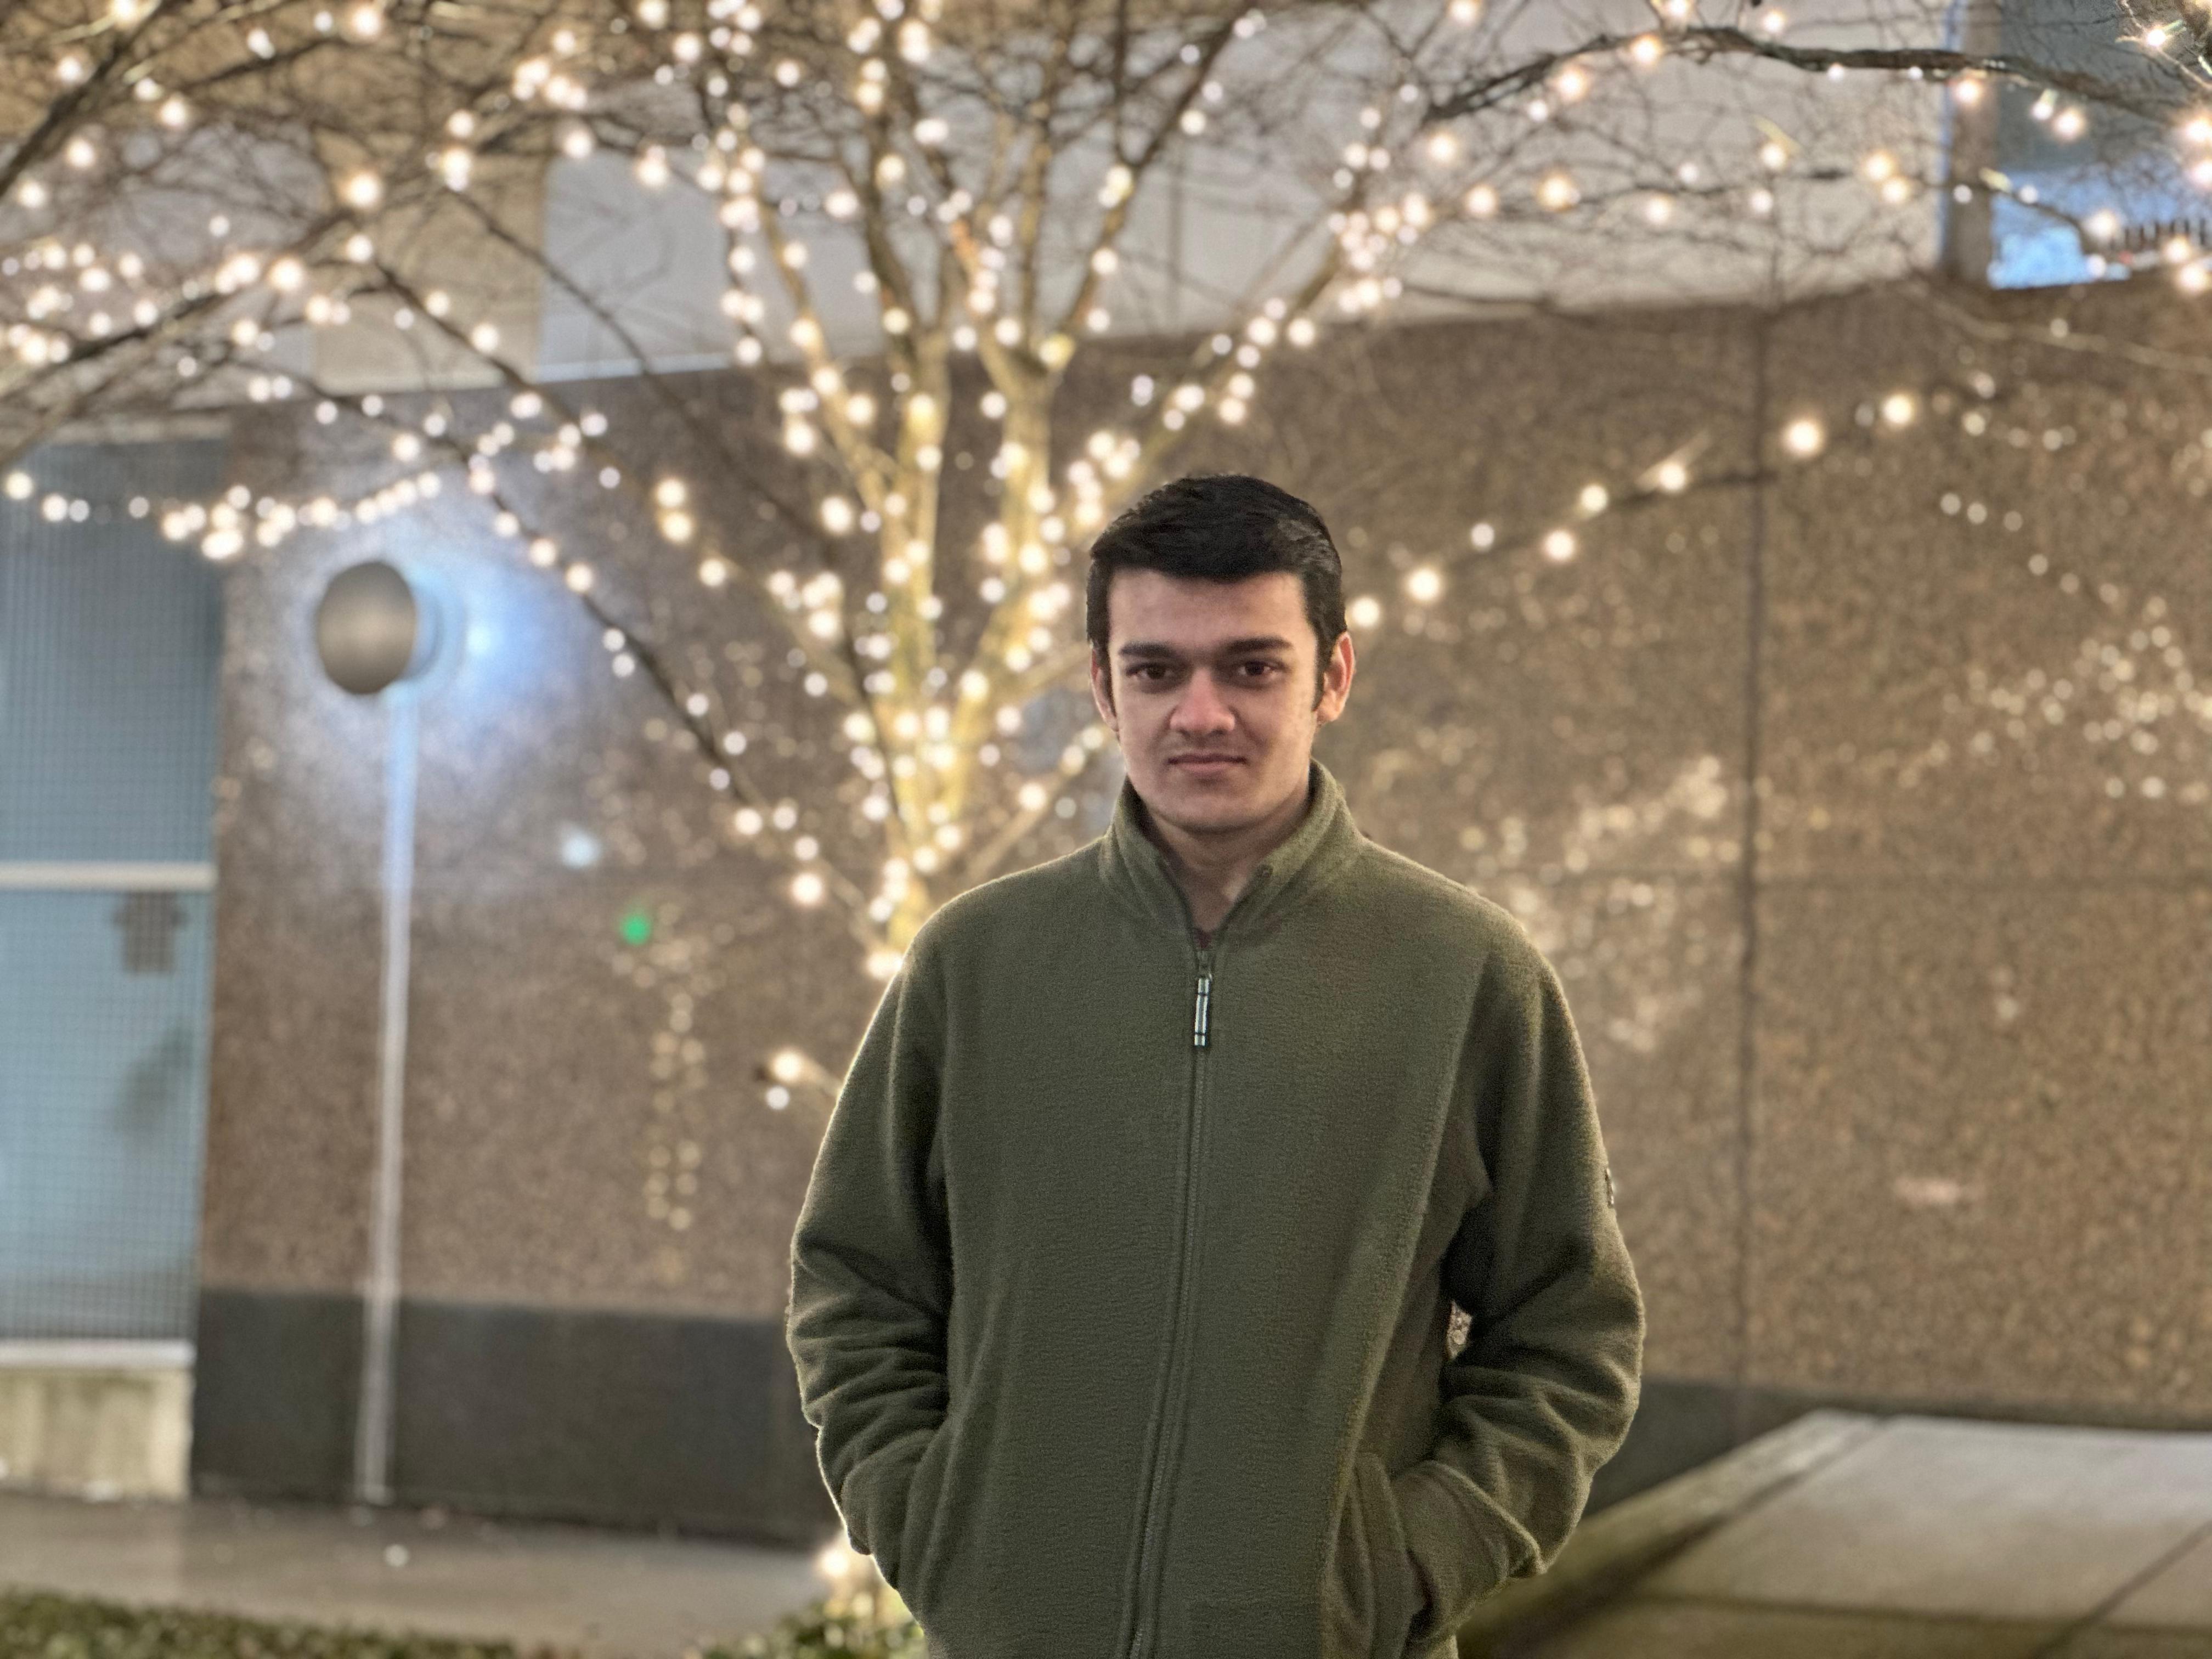 Shubh Bhojak standing outside in a green sweater. Lights are on the trees behind him and a building behind the tree.